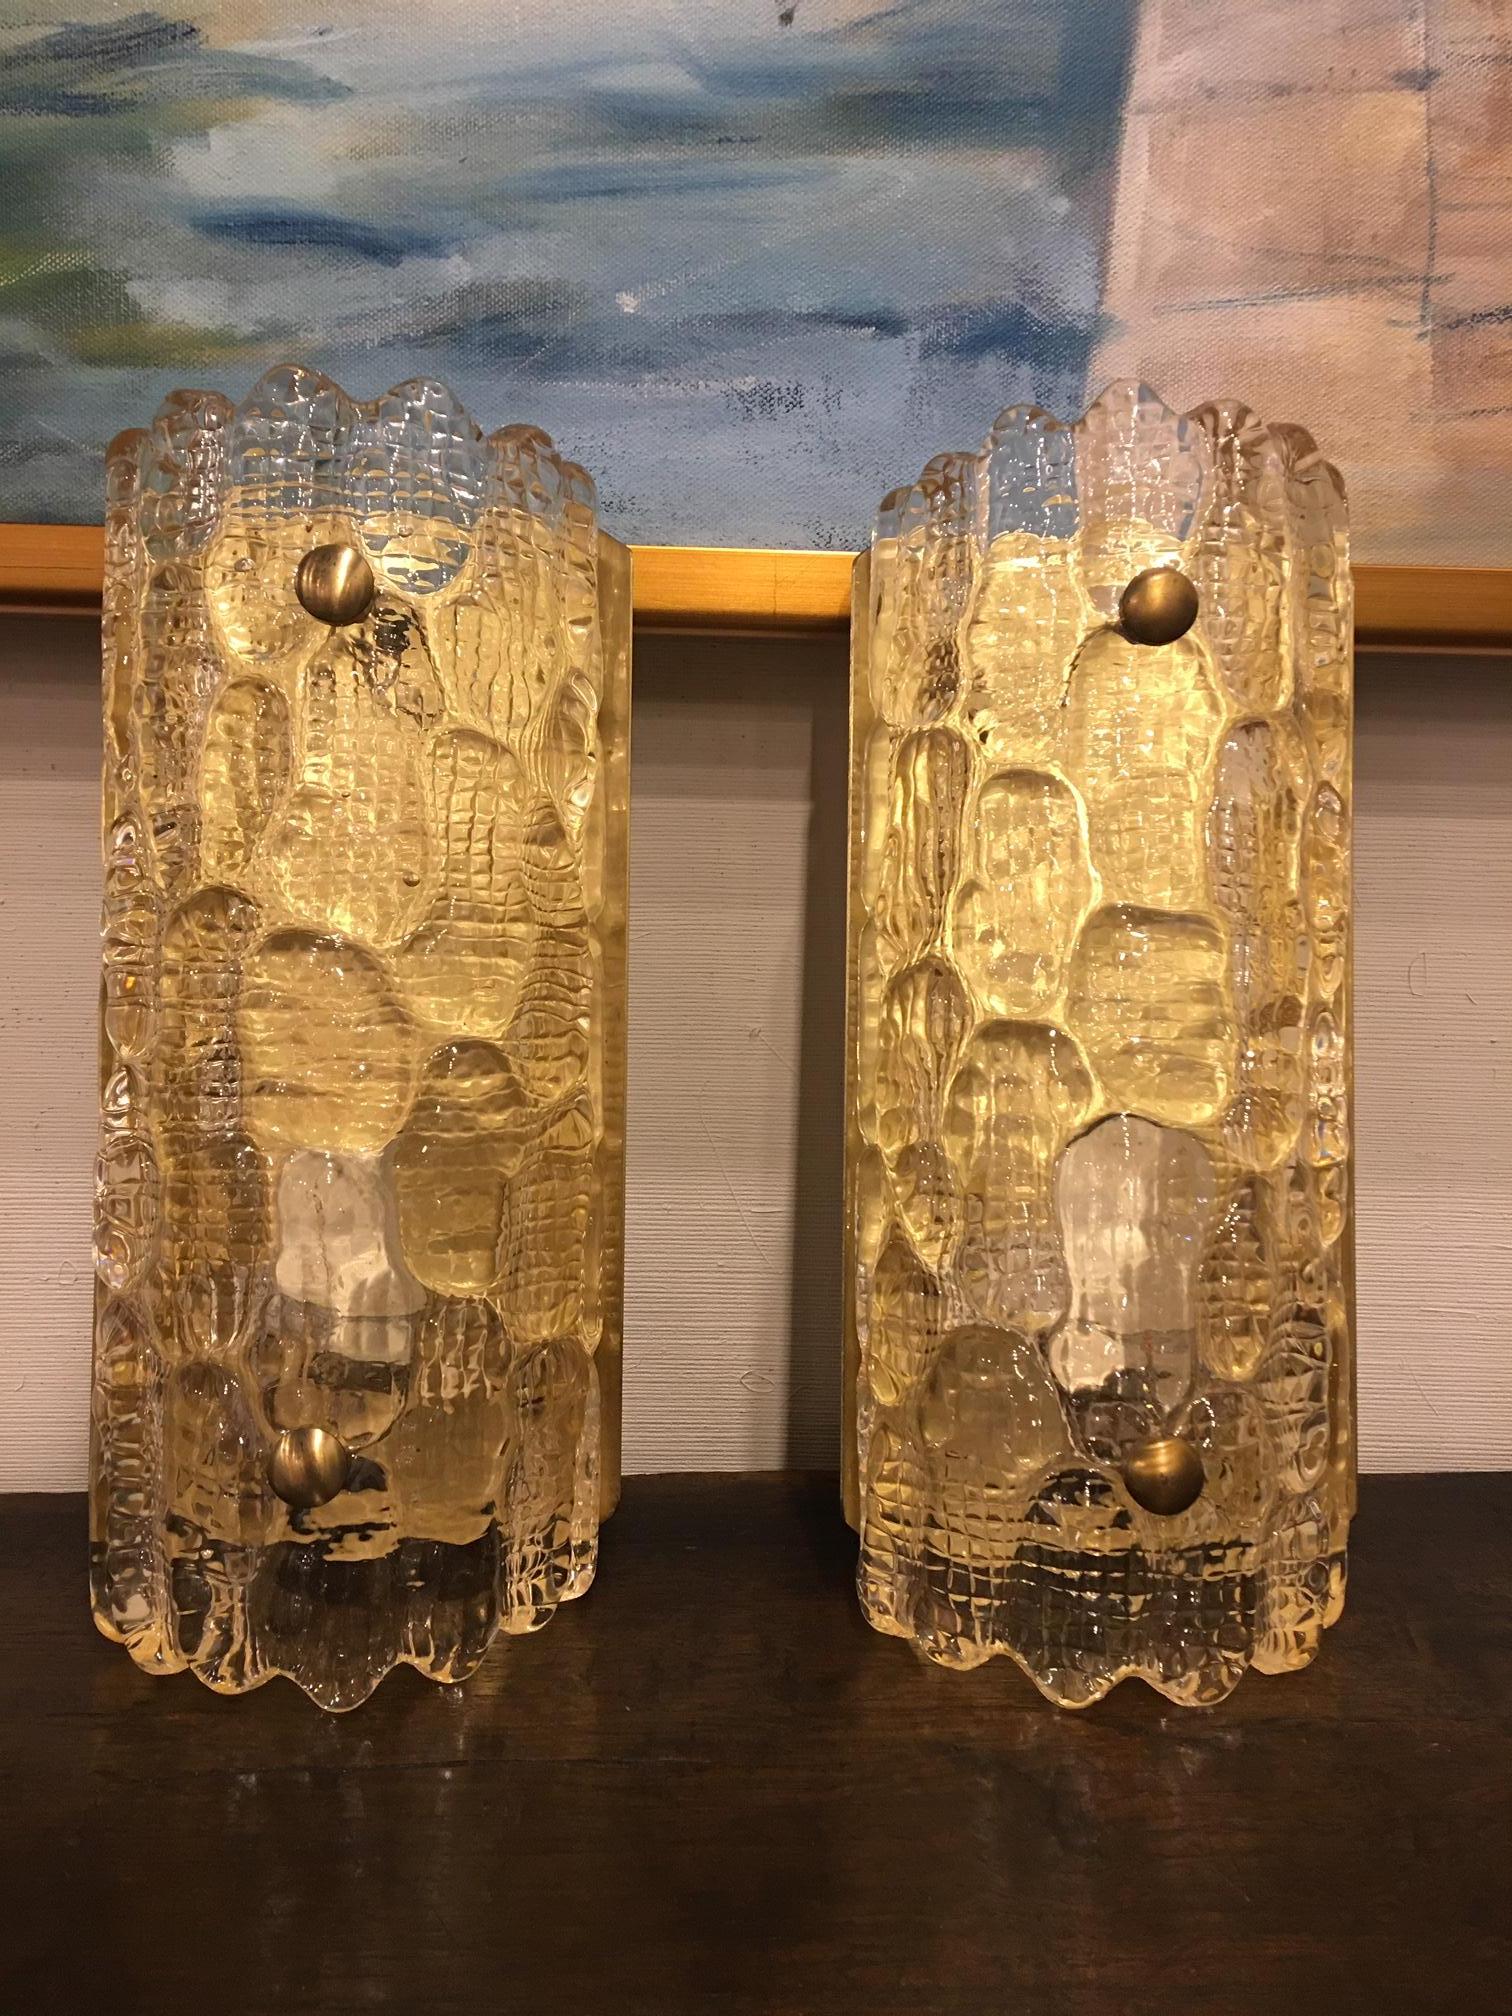 Pair of Art Deco Murano glass sconces on brass bases, 20th century